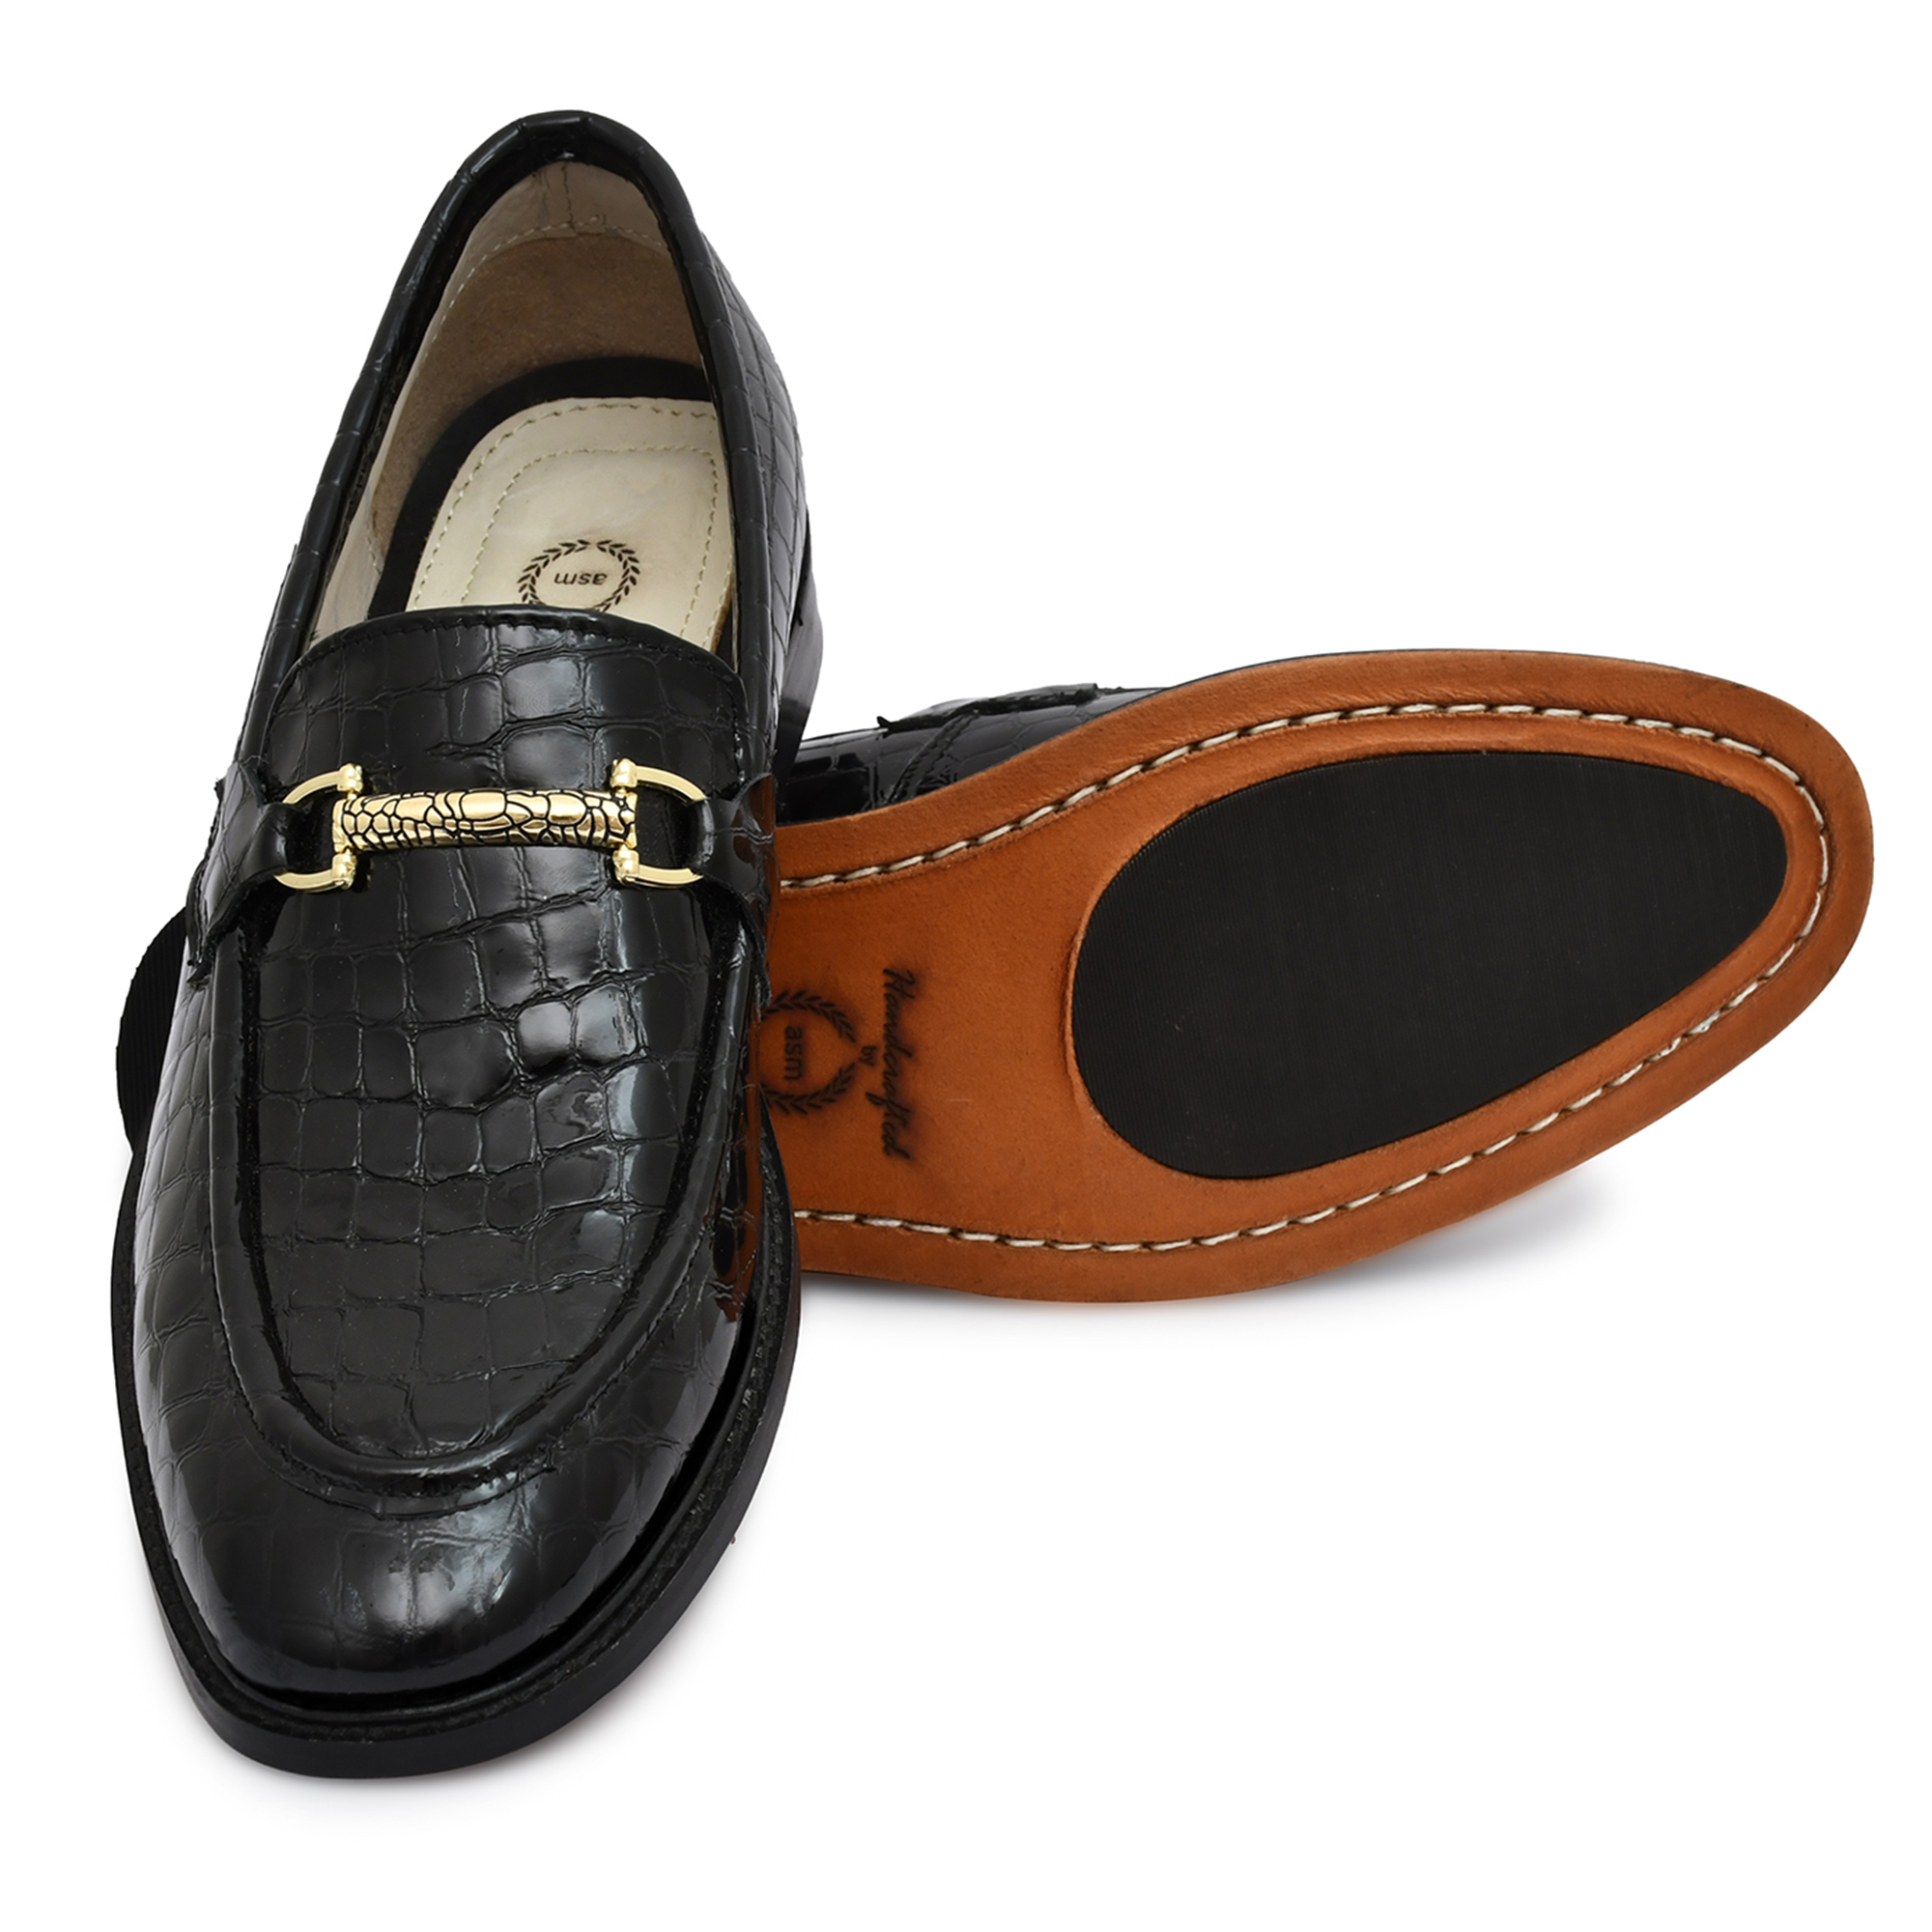 leather penny loafers